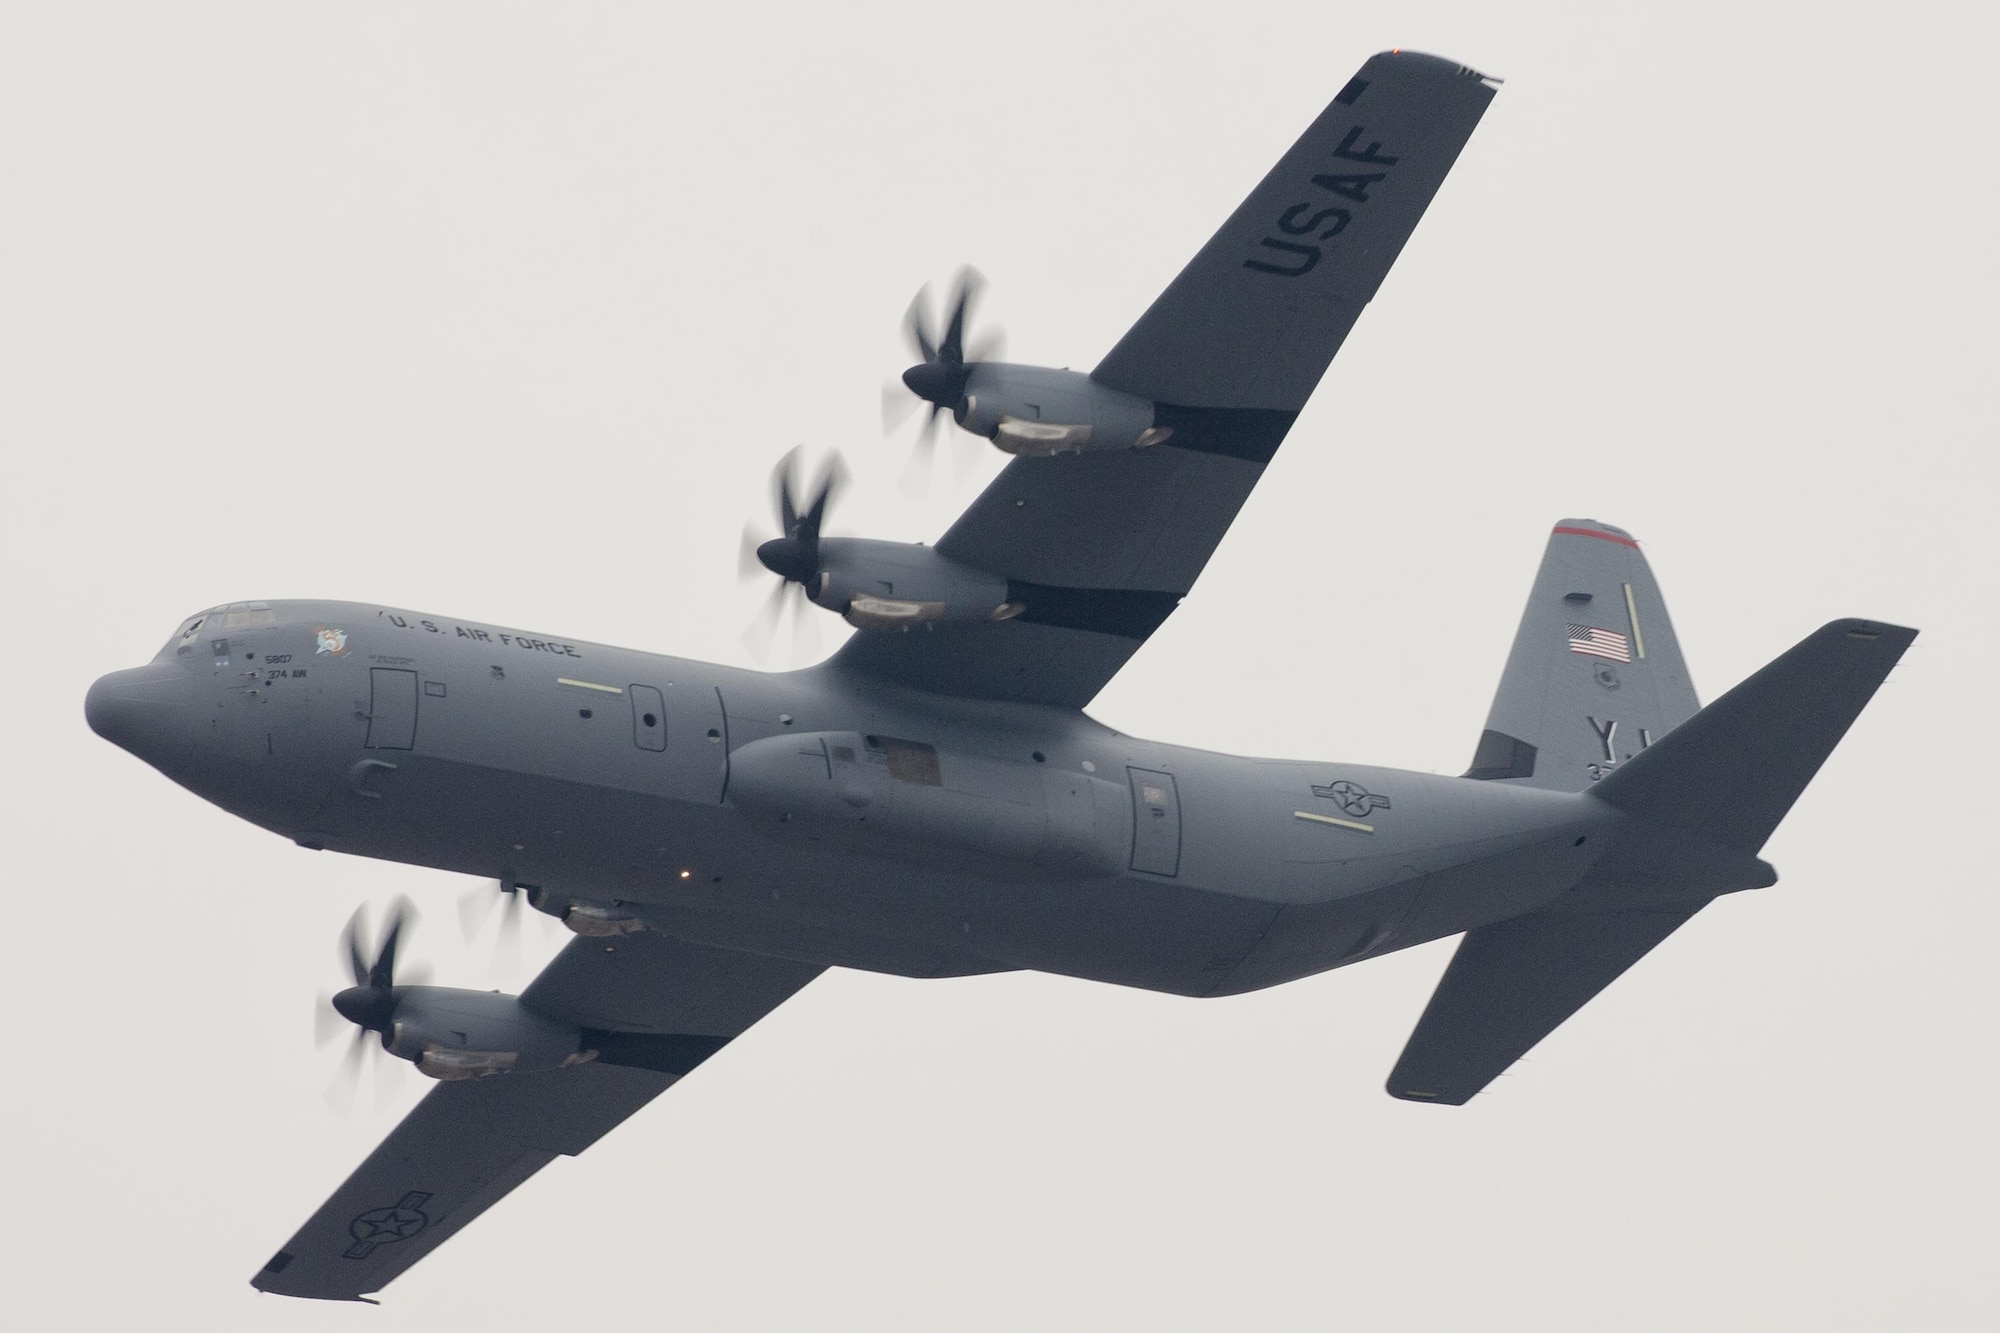 A C-130J Super Hercules flies over Yokota Air Base, Japan, March 6, 2017. This is the first C-130J to be assigned to Pacific Air Forces. Yokota serves as the primary Western Pacific airlift hub for U.S. Air Force peacetime and contingency operations. Missions include tactical air land, airdrop, aeromedical evacuation, special operations and distinguished visitor airlift.(U.S. Air Force photo by Yasuo Osakabe)